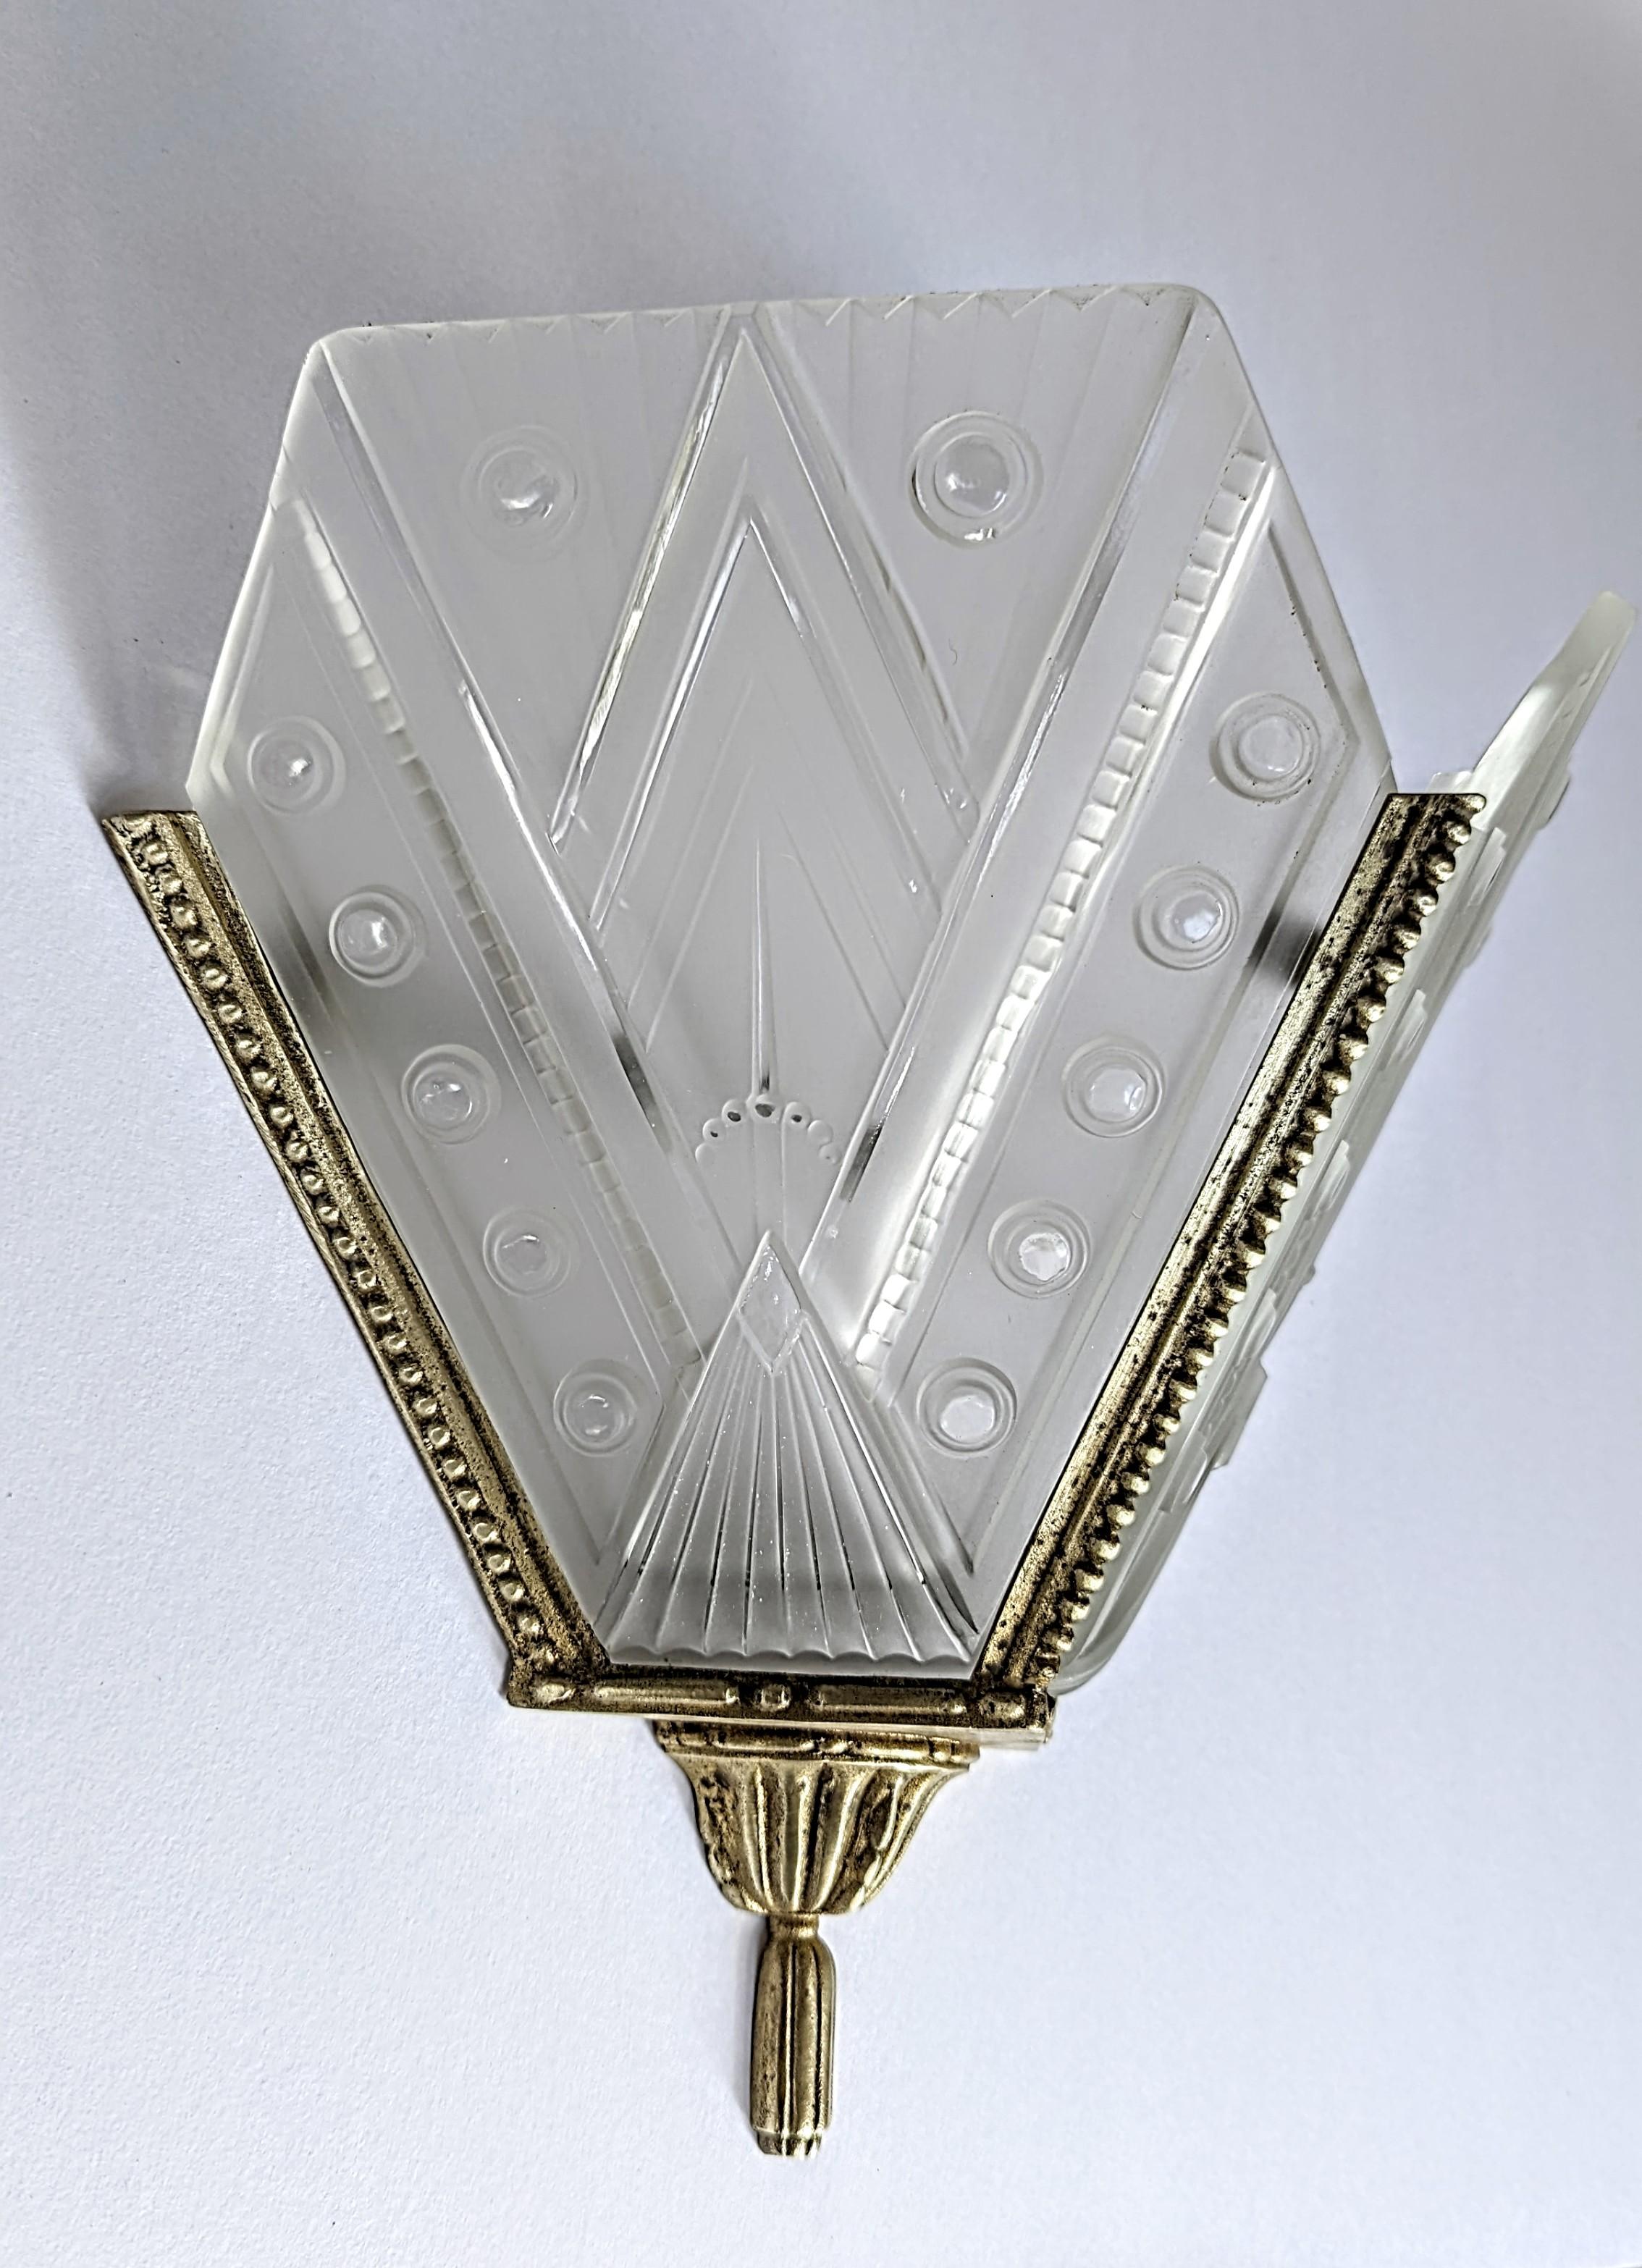 A pair of French Art Deco wall sconces were designed by the master 